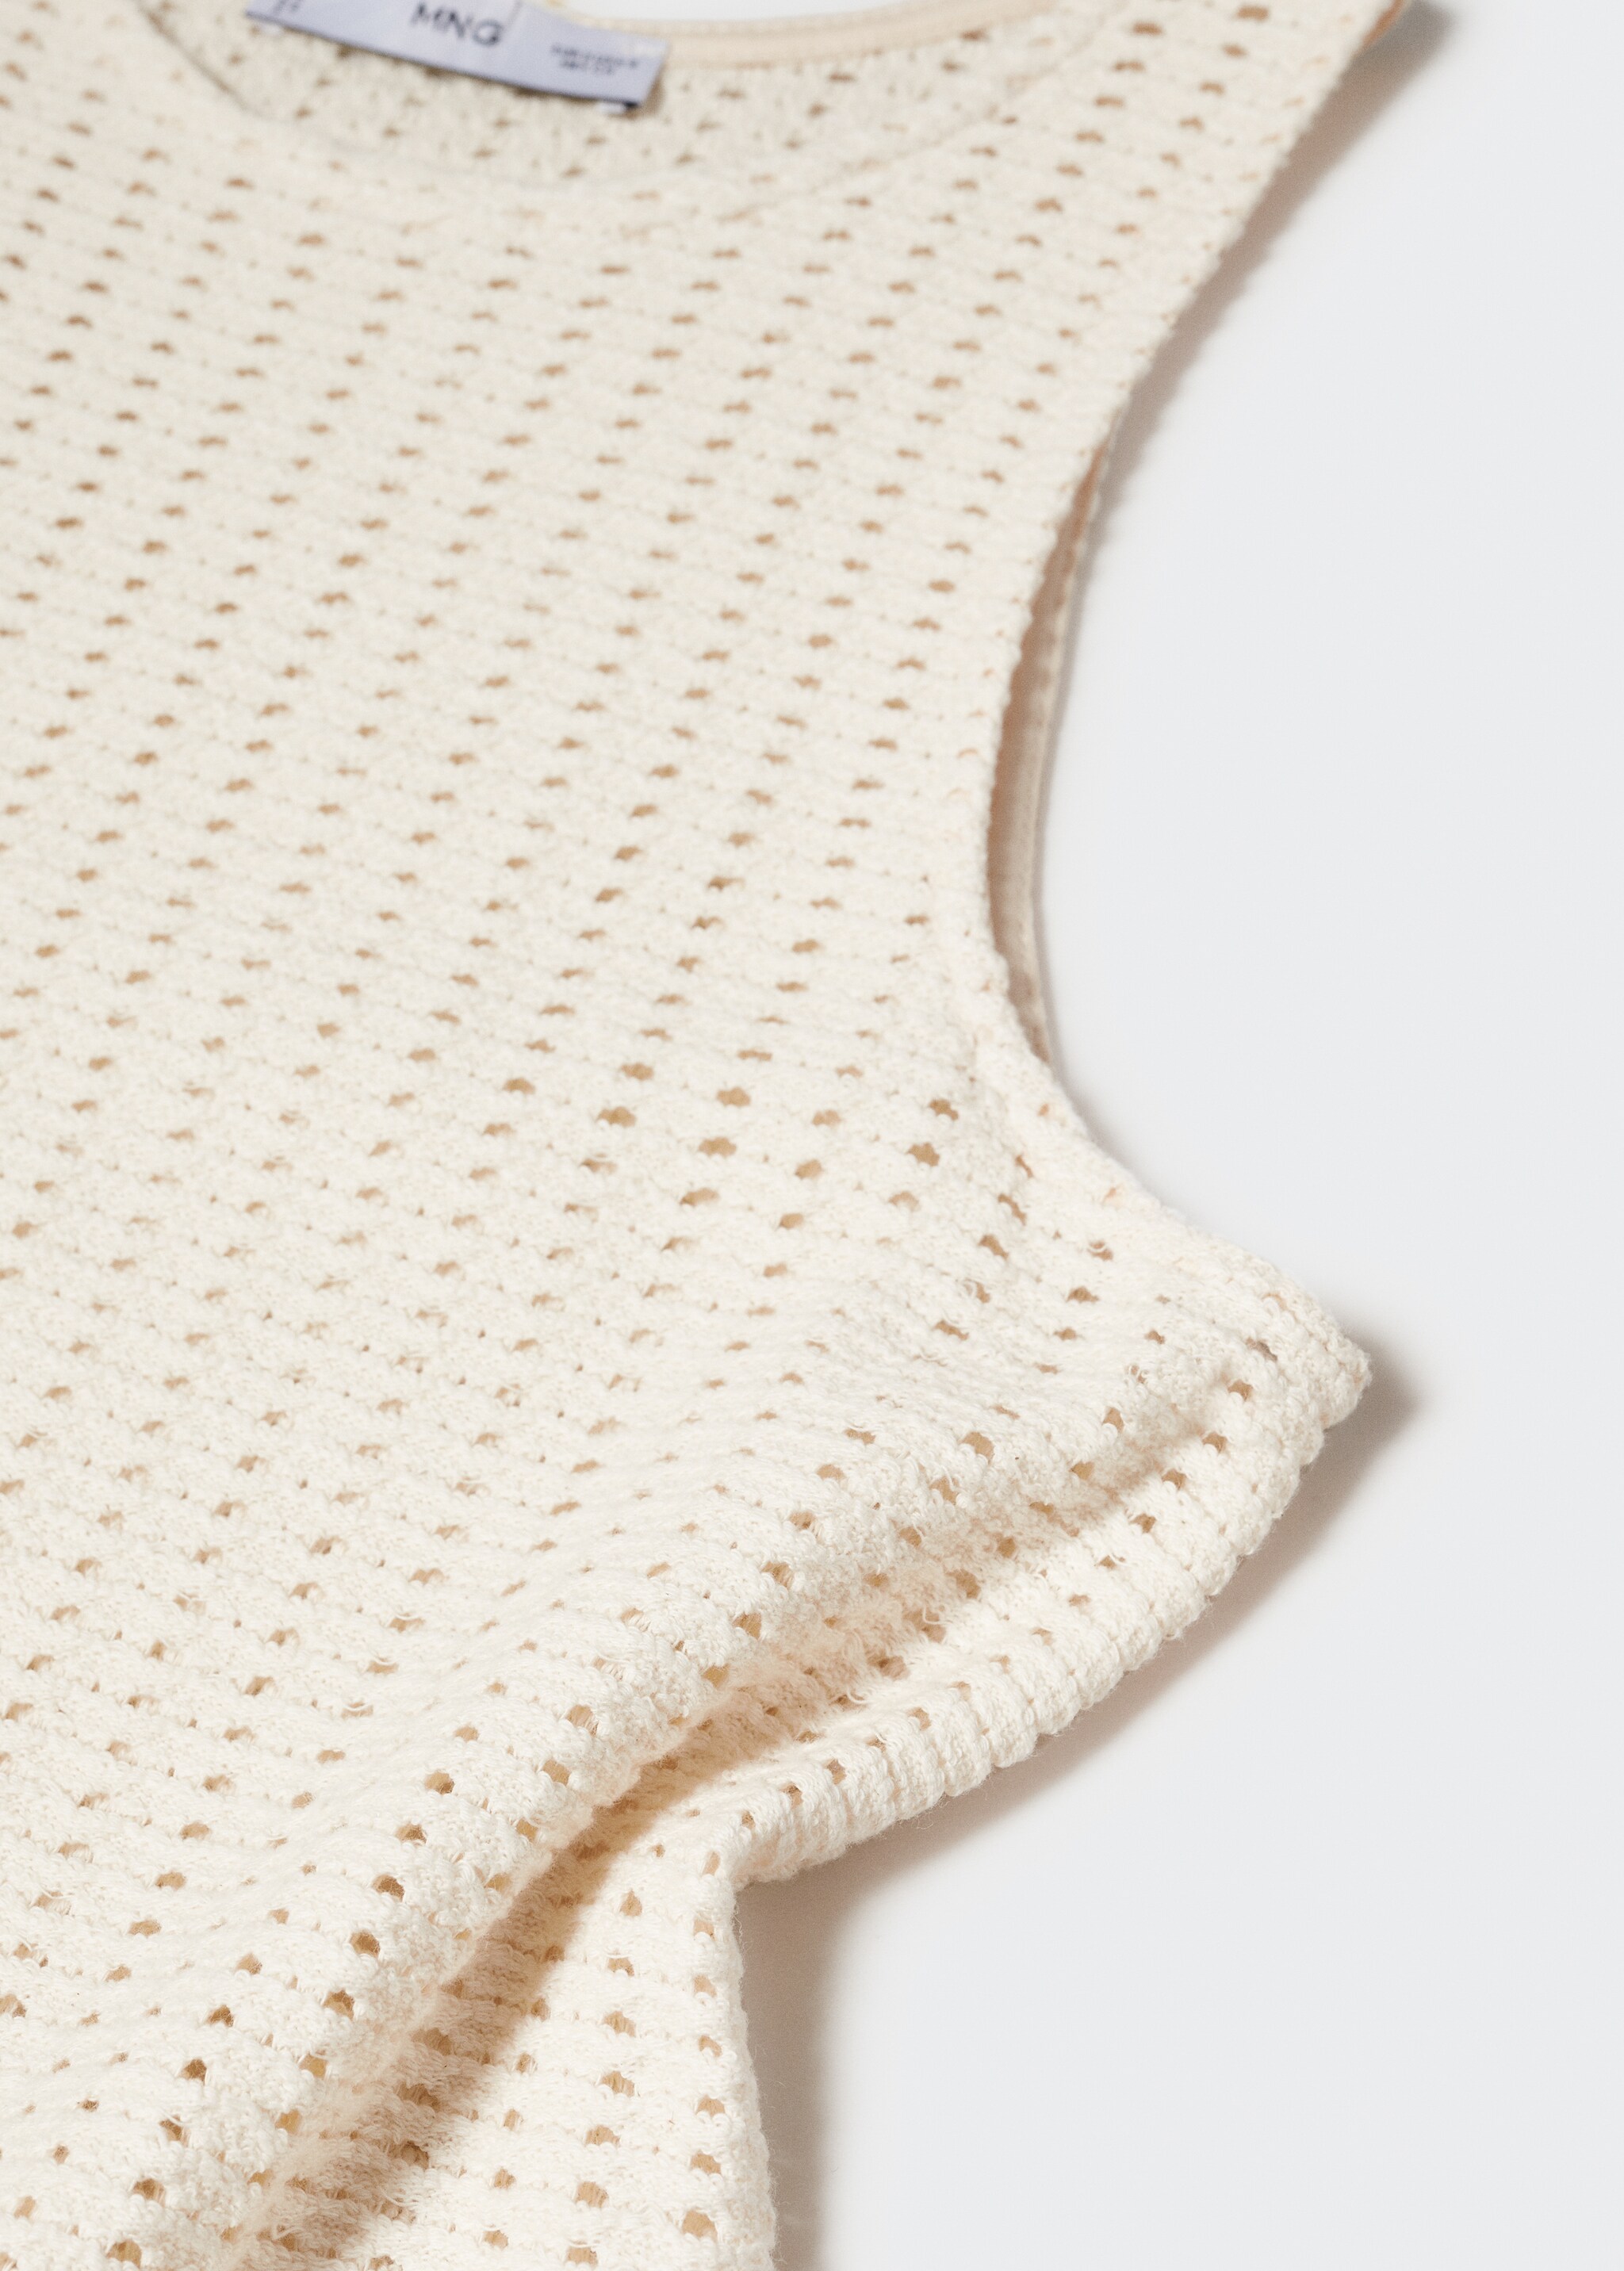 Knit openwork sweater - Details of the article 8